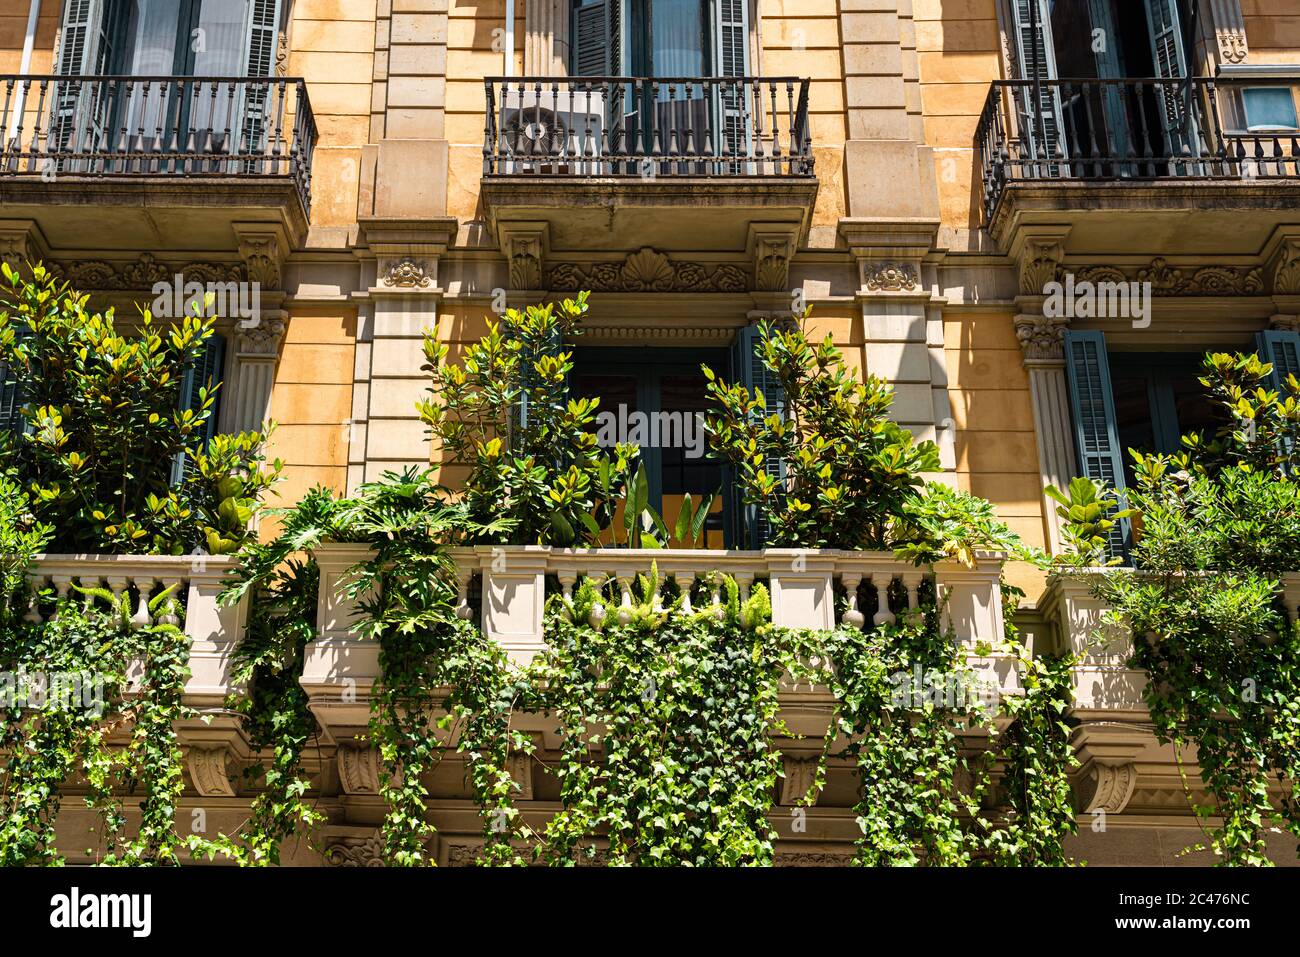 Facade Building Architecture With Lots Of Overgrown Green Vegetation In City Of Barcelona, Spain Stock Photo